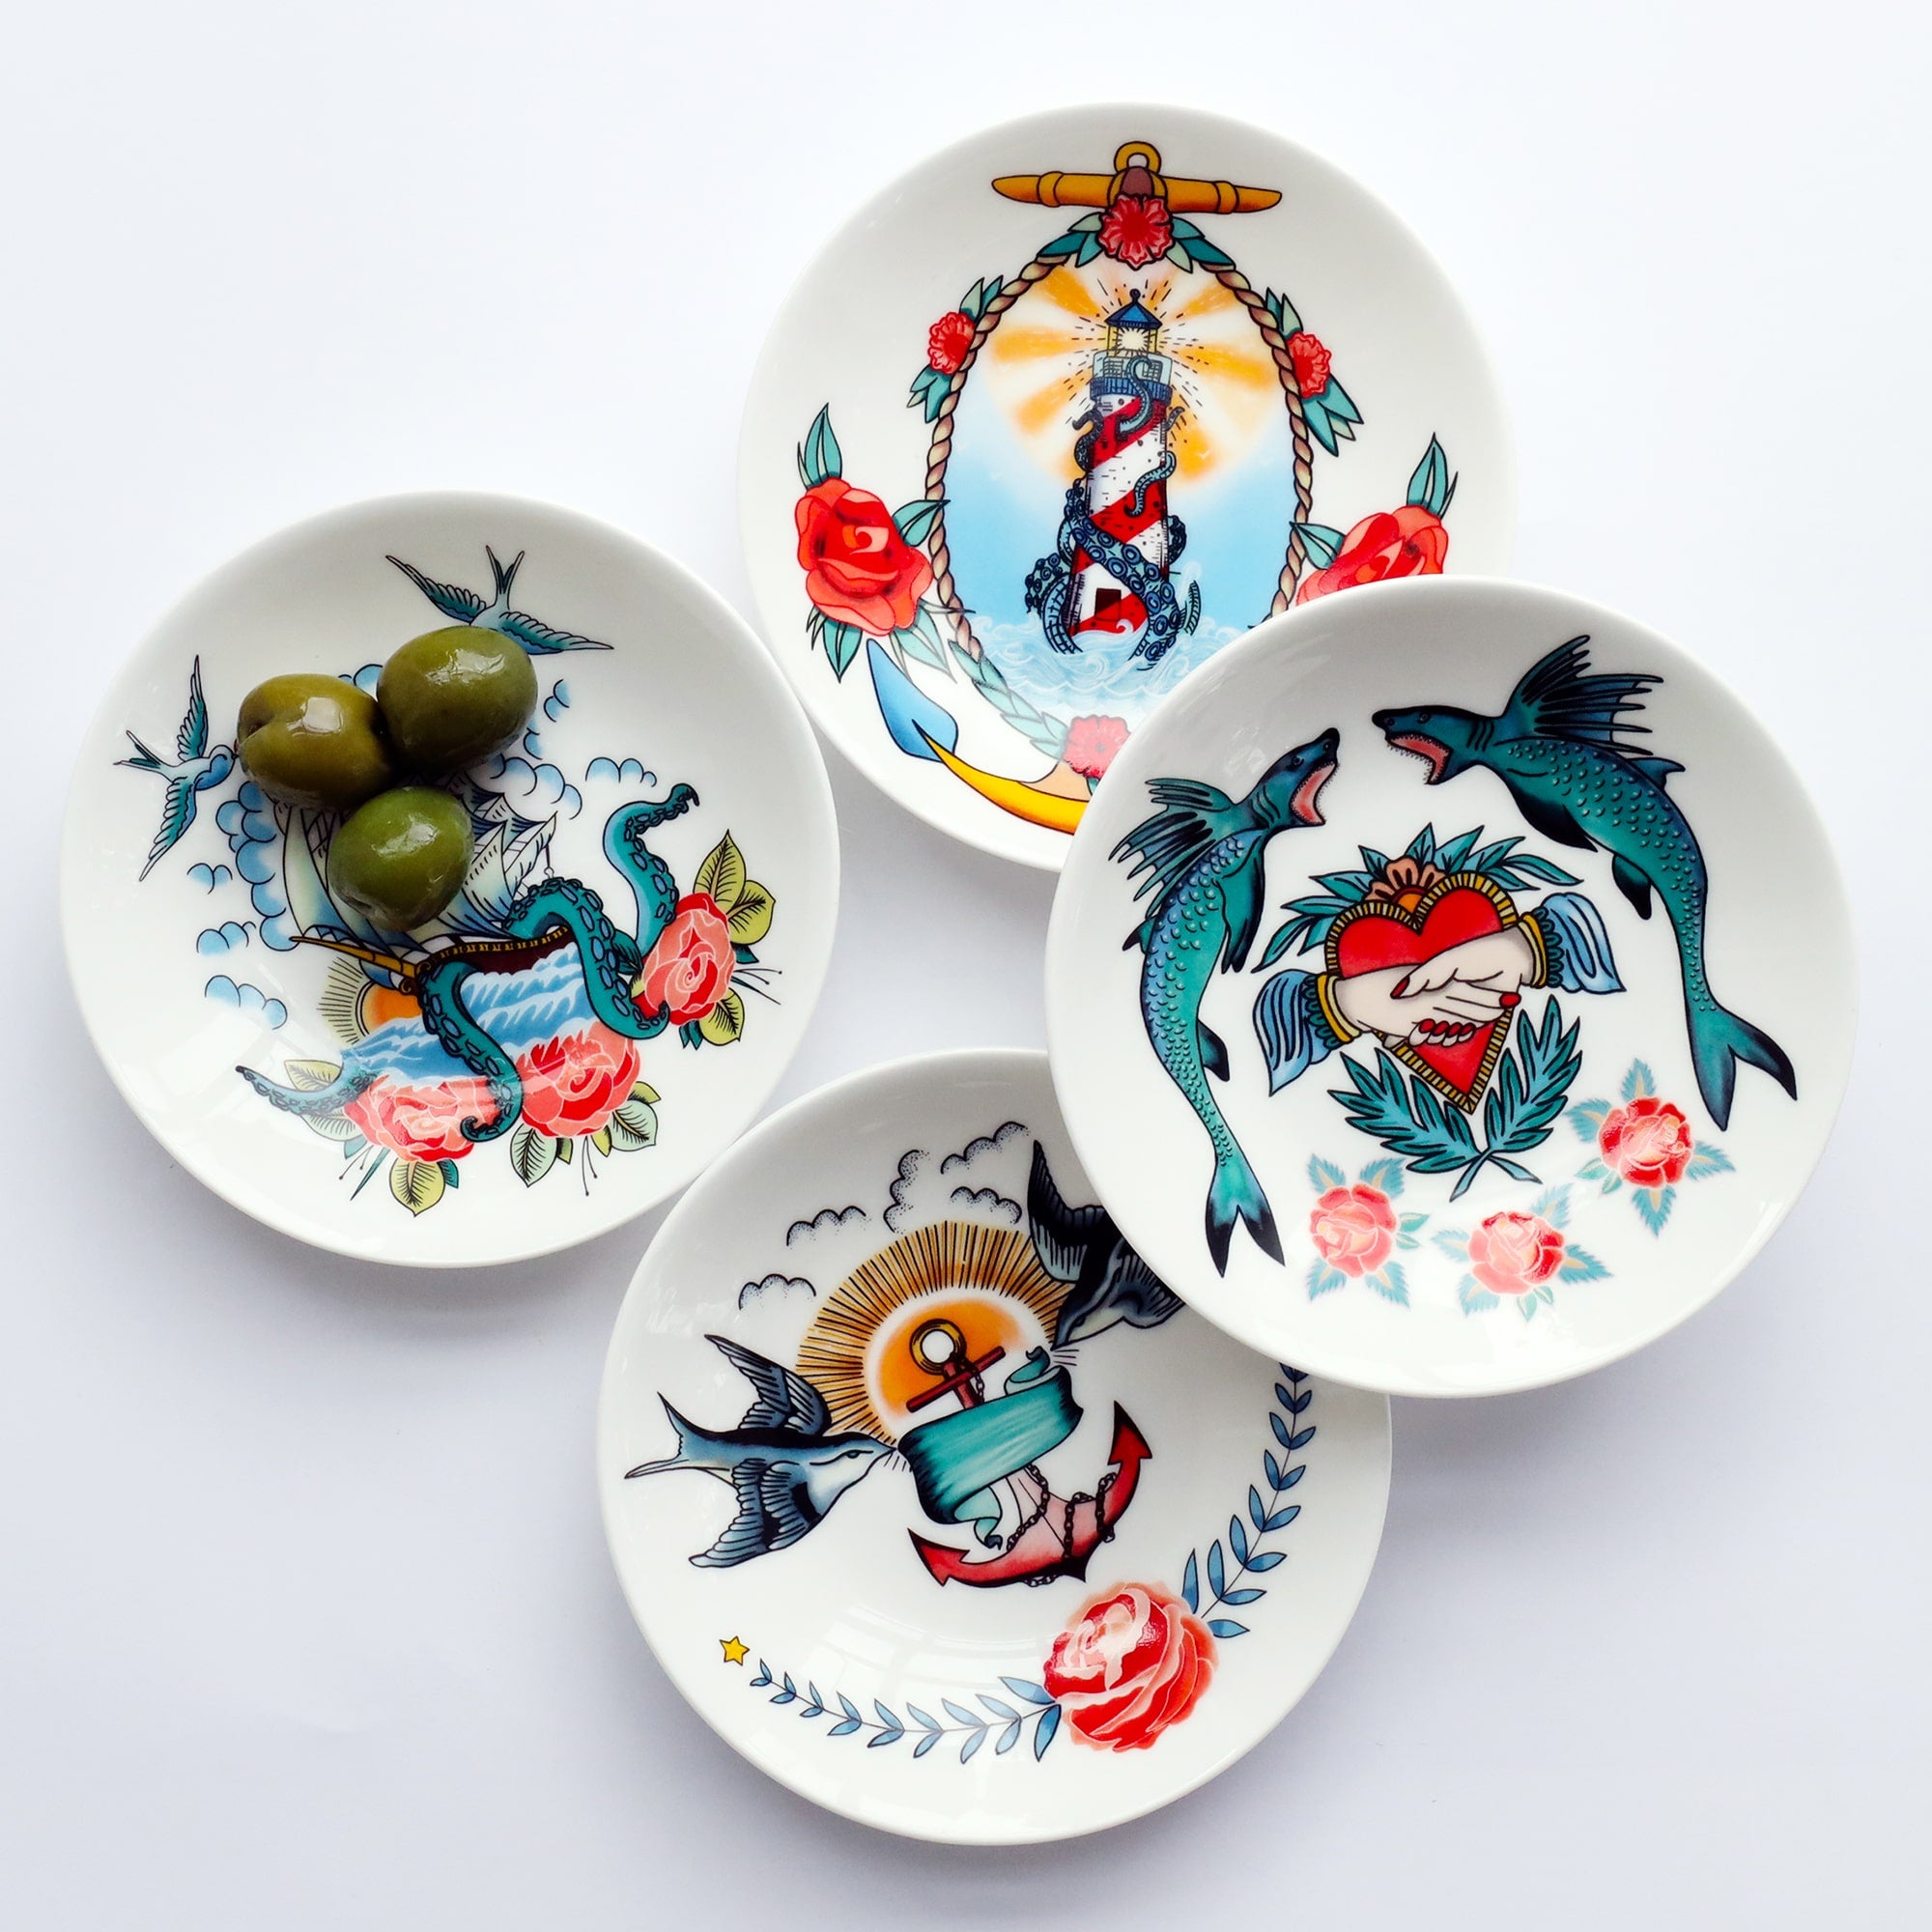 4 nibbles dishes with brightly coloured sailors inspired tattoo designs. One of the dishes has 3 green olives in to show the scale of the dish.